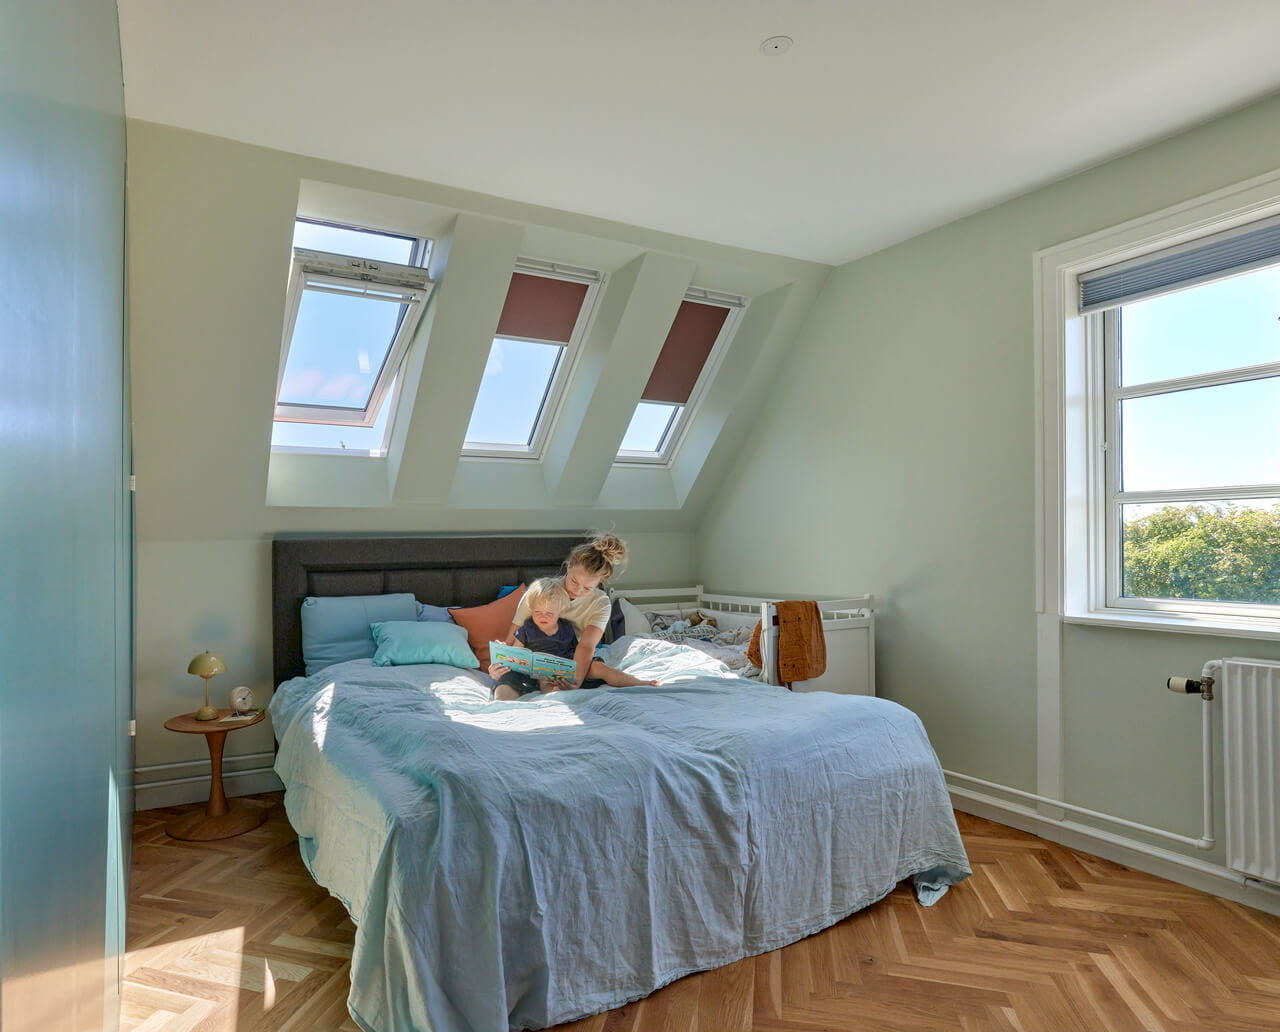 A bright bedroom with roof windows